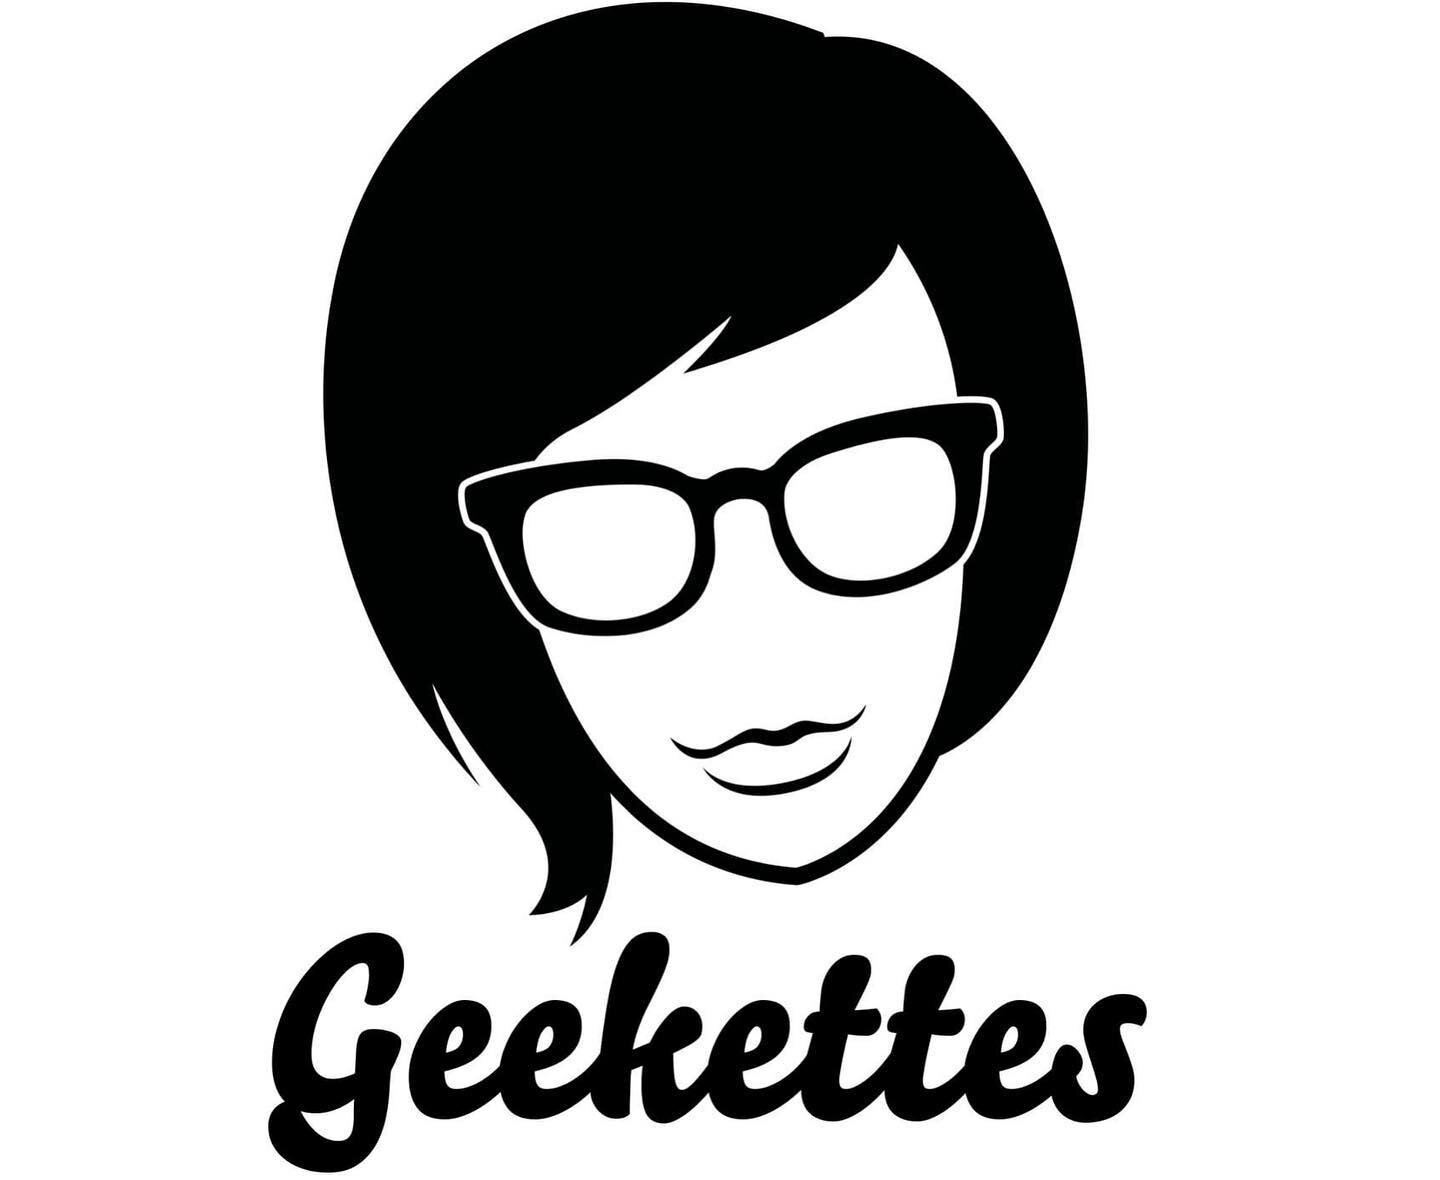 We will be sharing some news this October! Please sign up for our newsletter via Geekettes.io for our latest announcement. #Geekettes